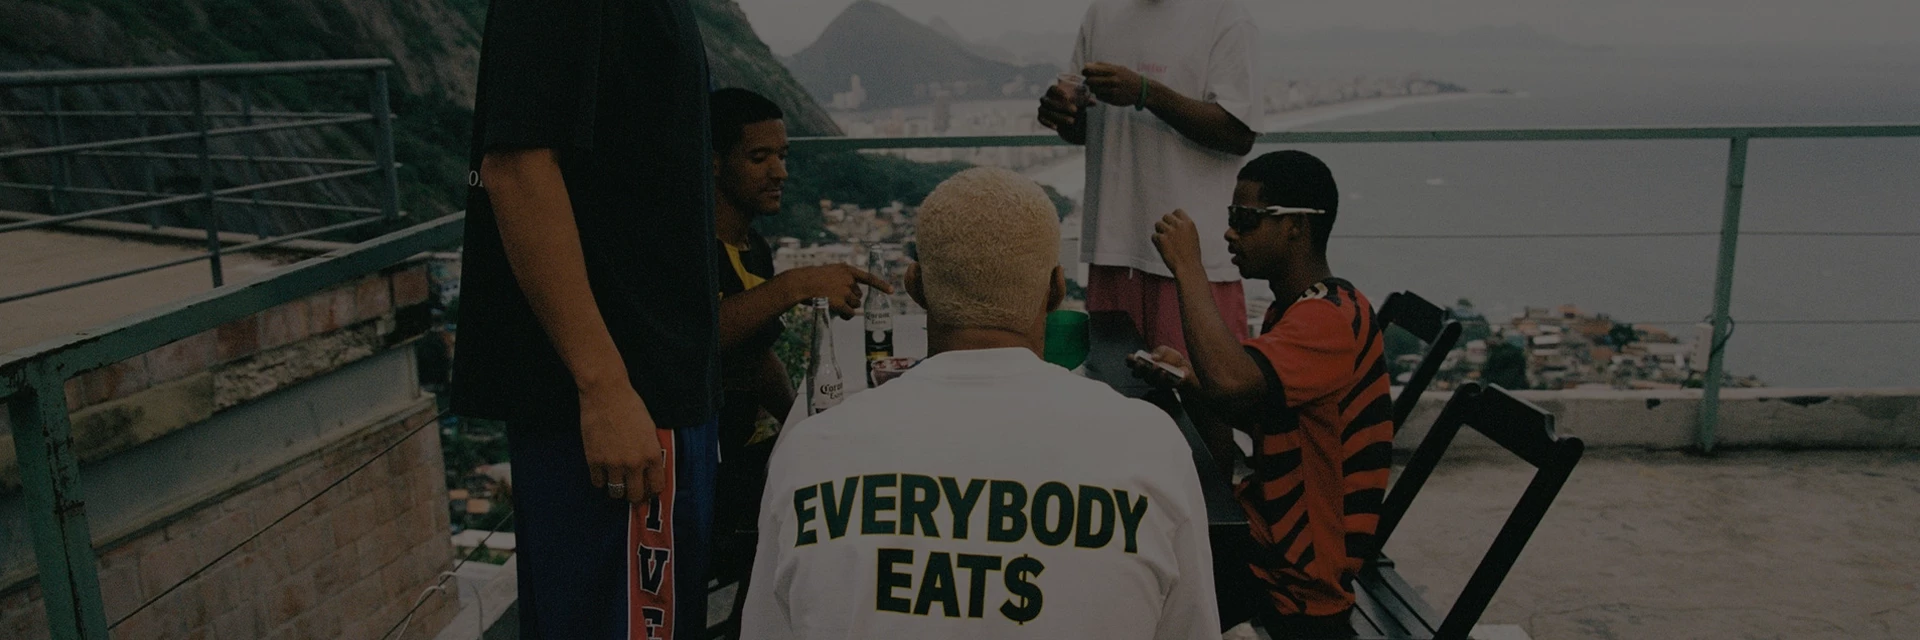 New LFDY collection EVERYBODY EAT$ - check it out here now!